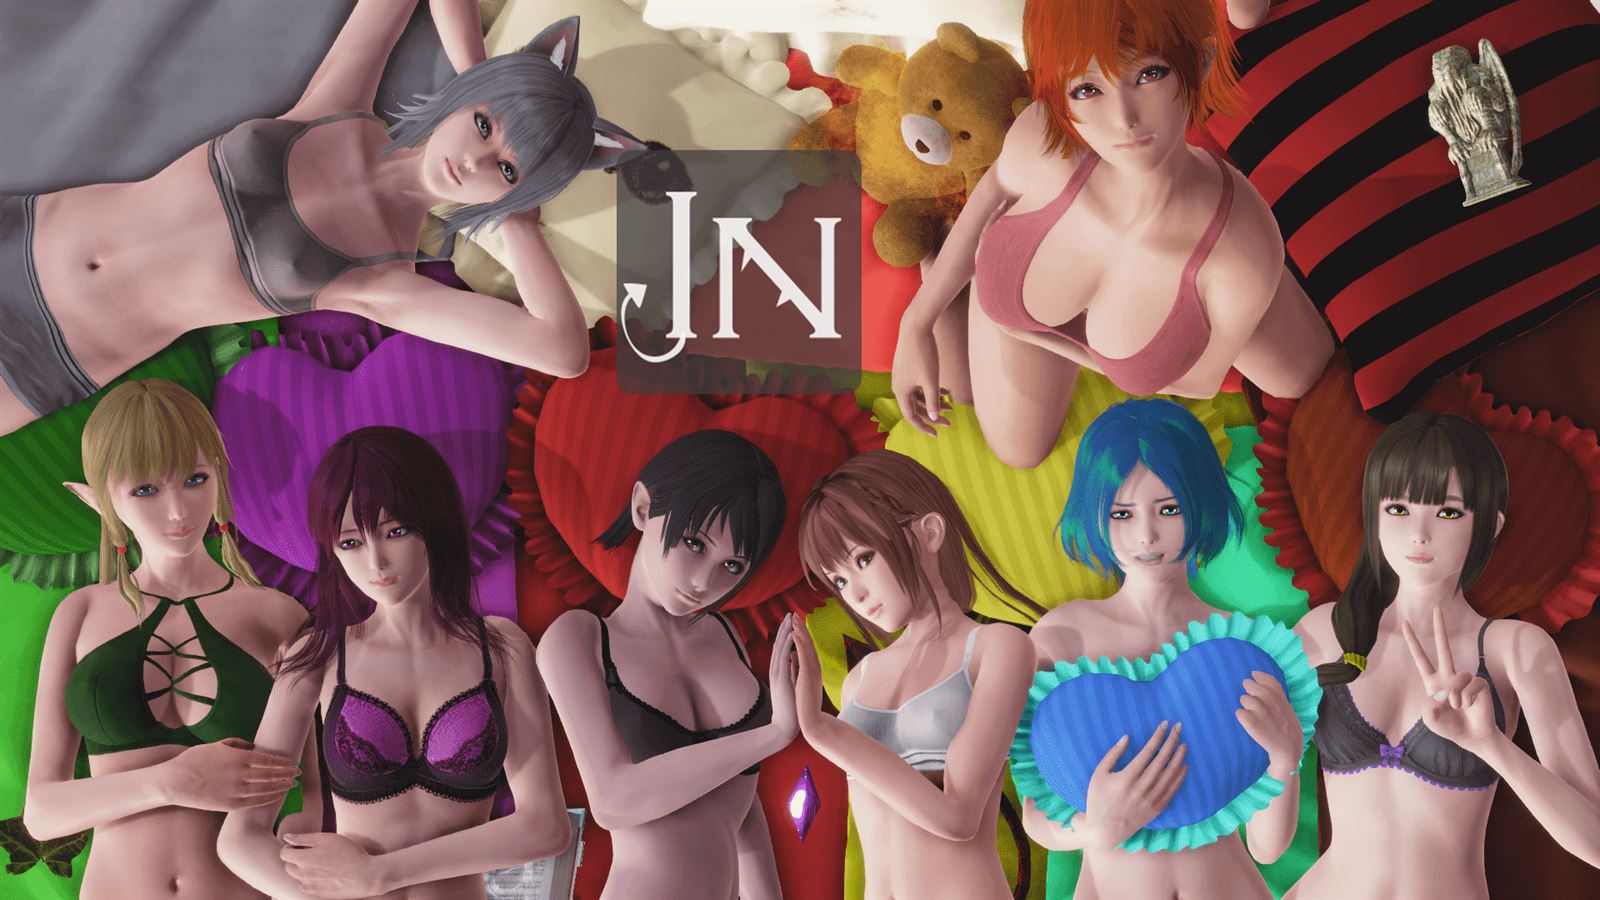 Insight porn xxx game download cover